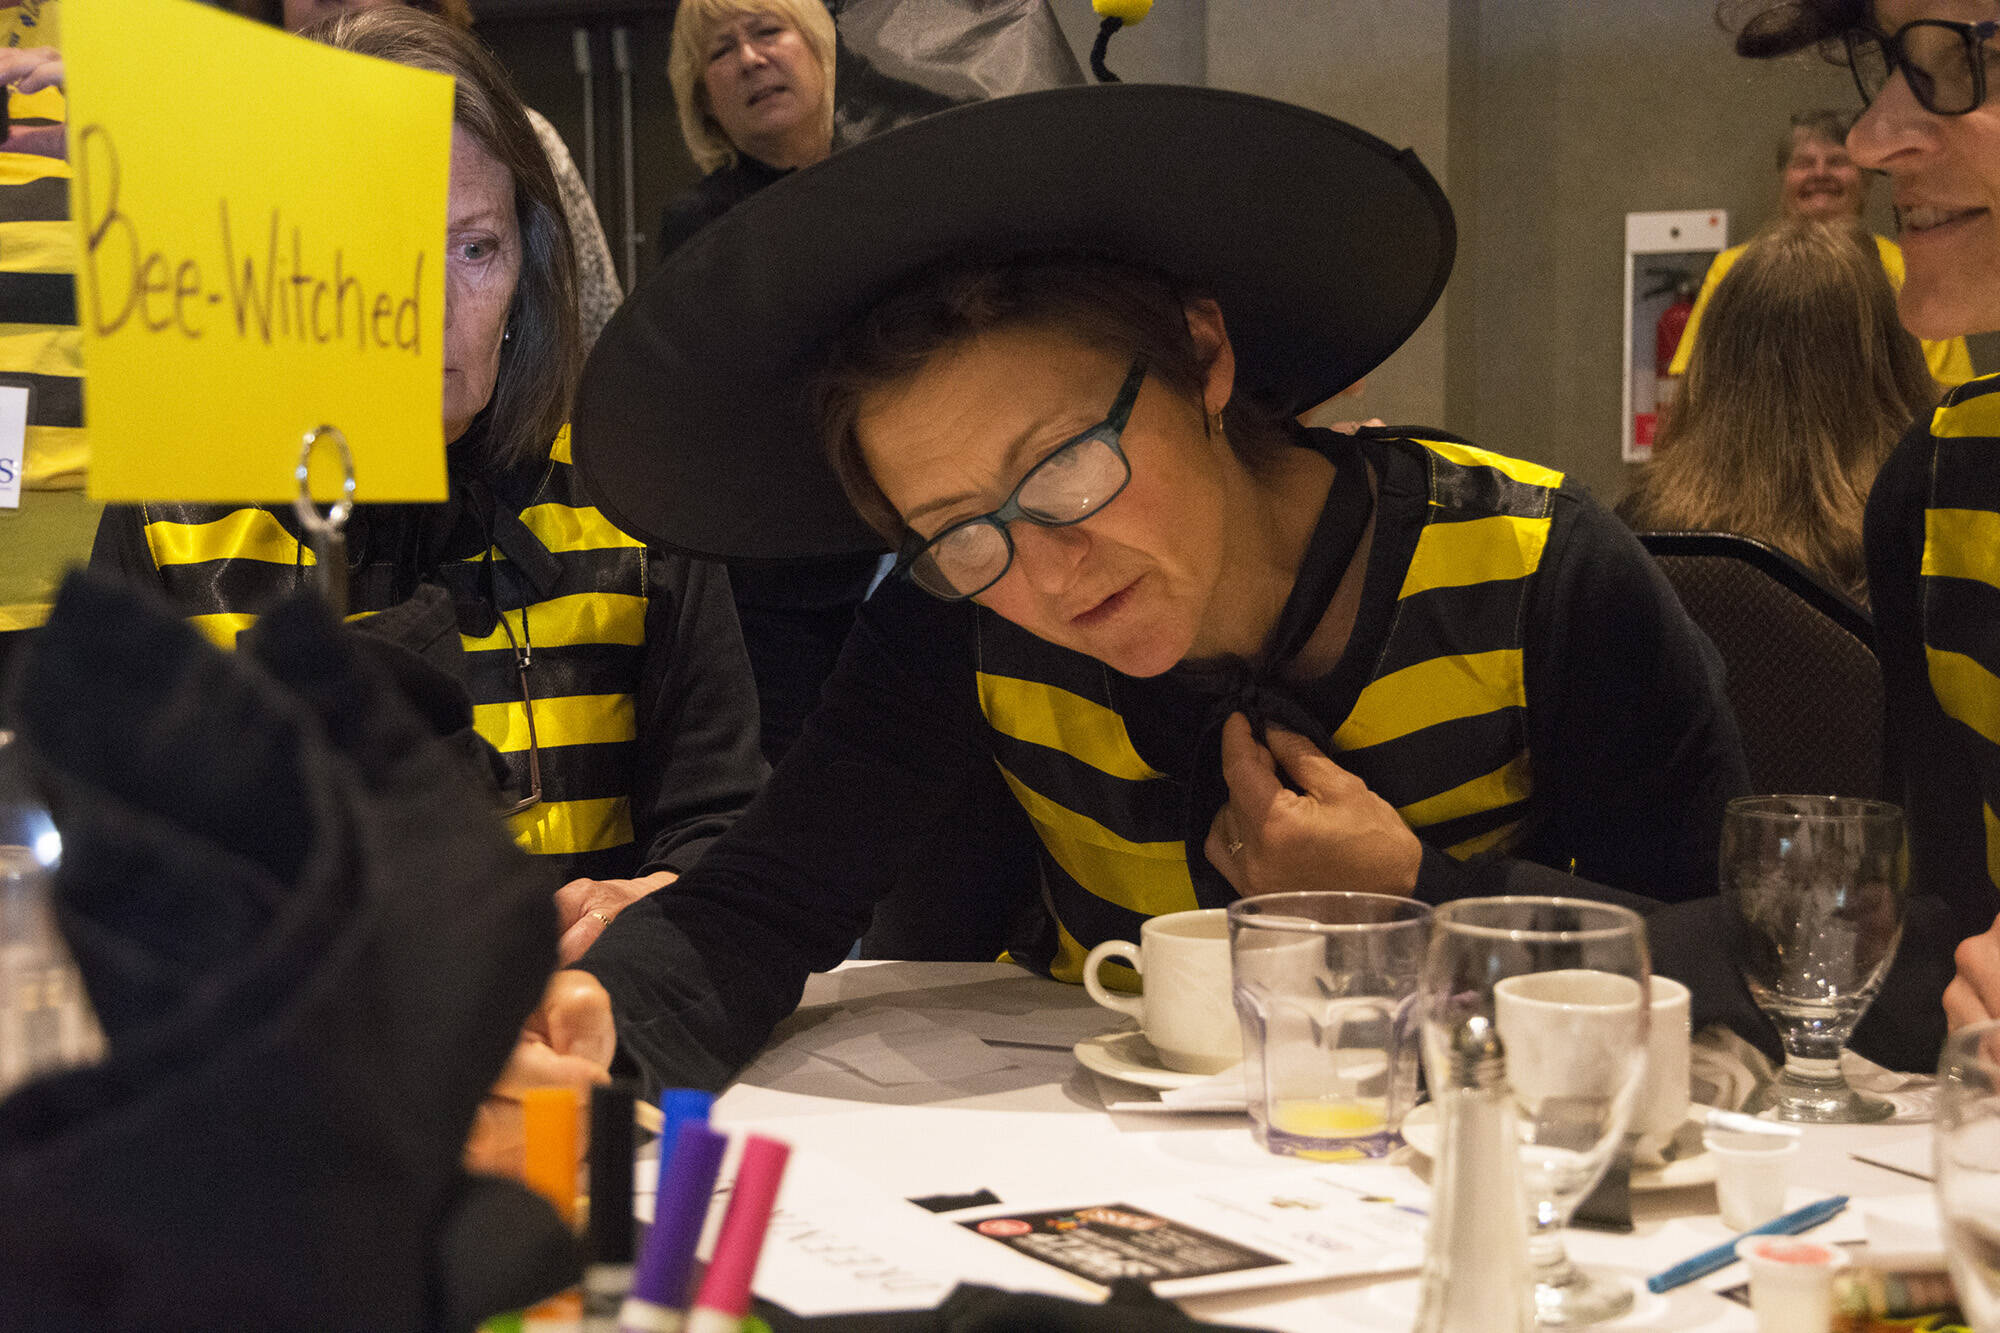 Team Bee-Witched has been superbly successful in previous spelling bees in Salmon Arm, this one in 2018. (File photo)